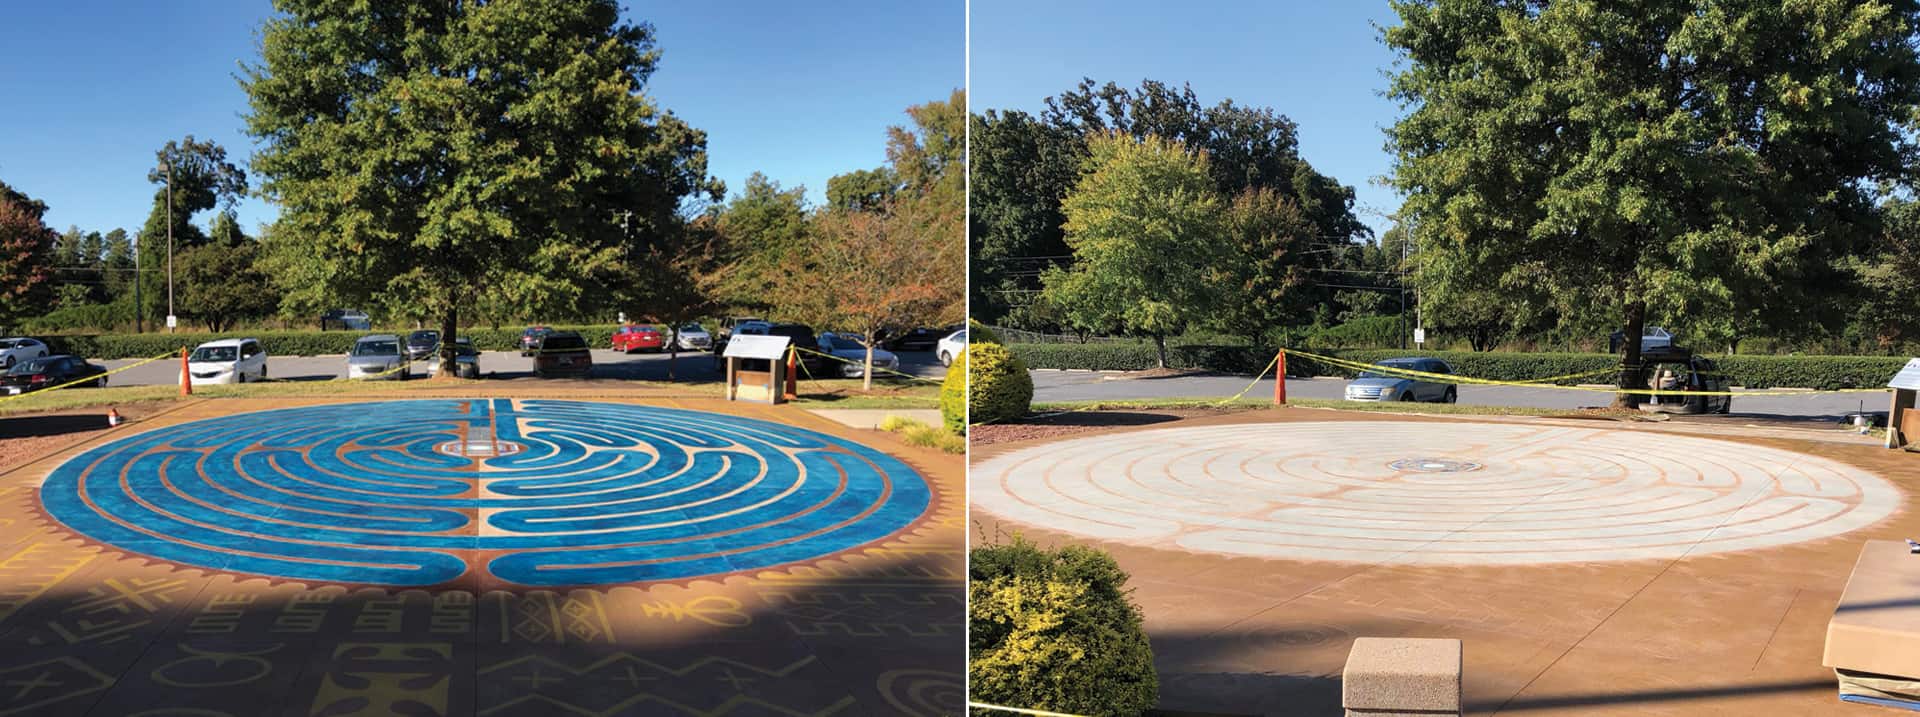 Before (right) and after (left) view of the Almetto Howey Alexander Labyrinth in Charlotte, N.C.